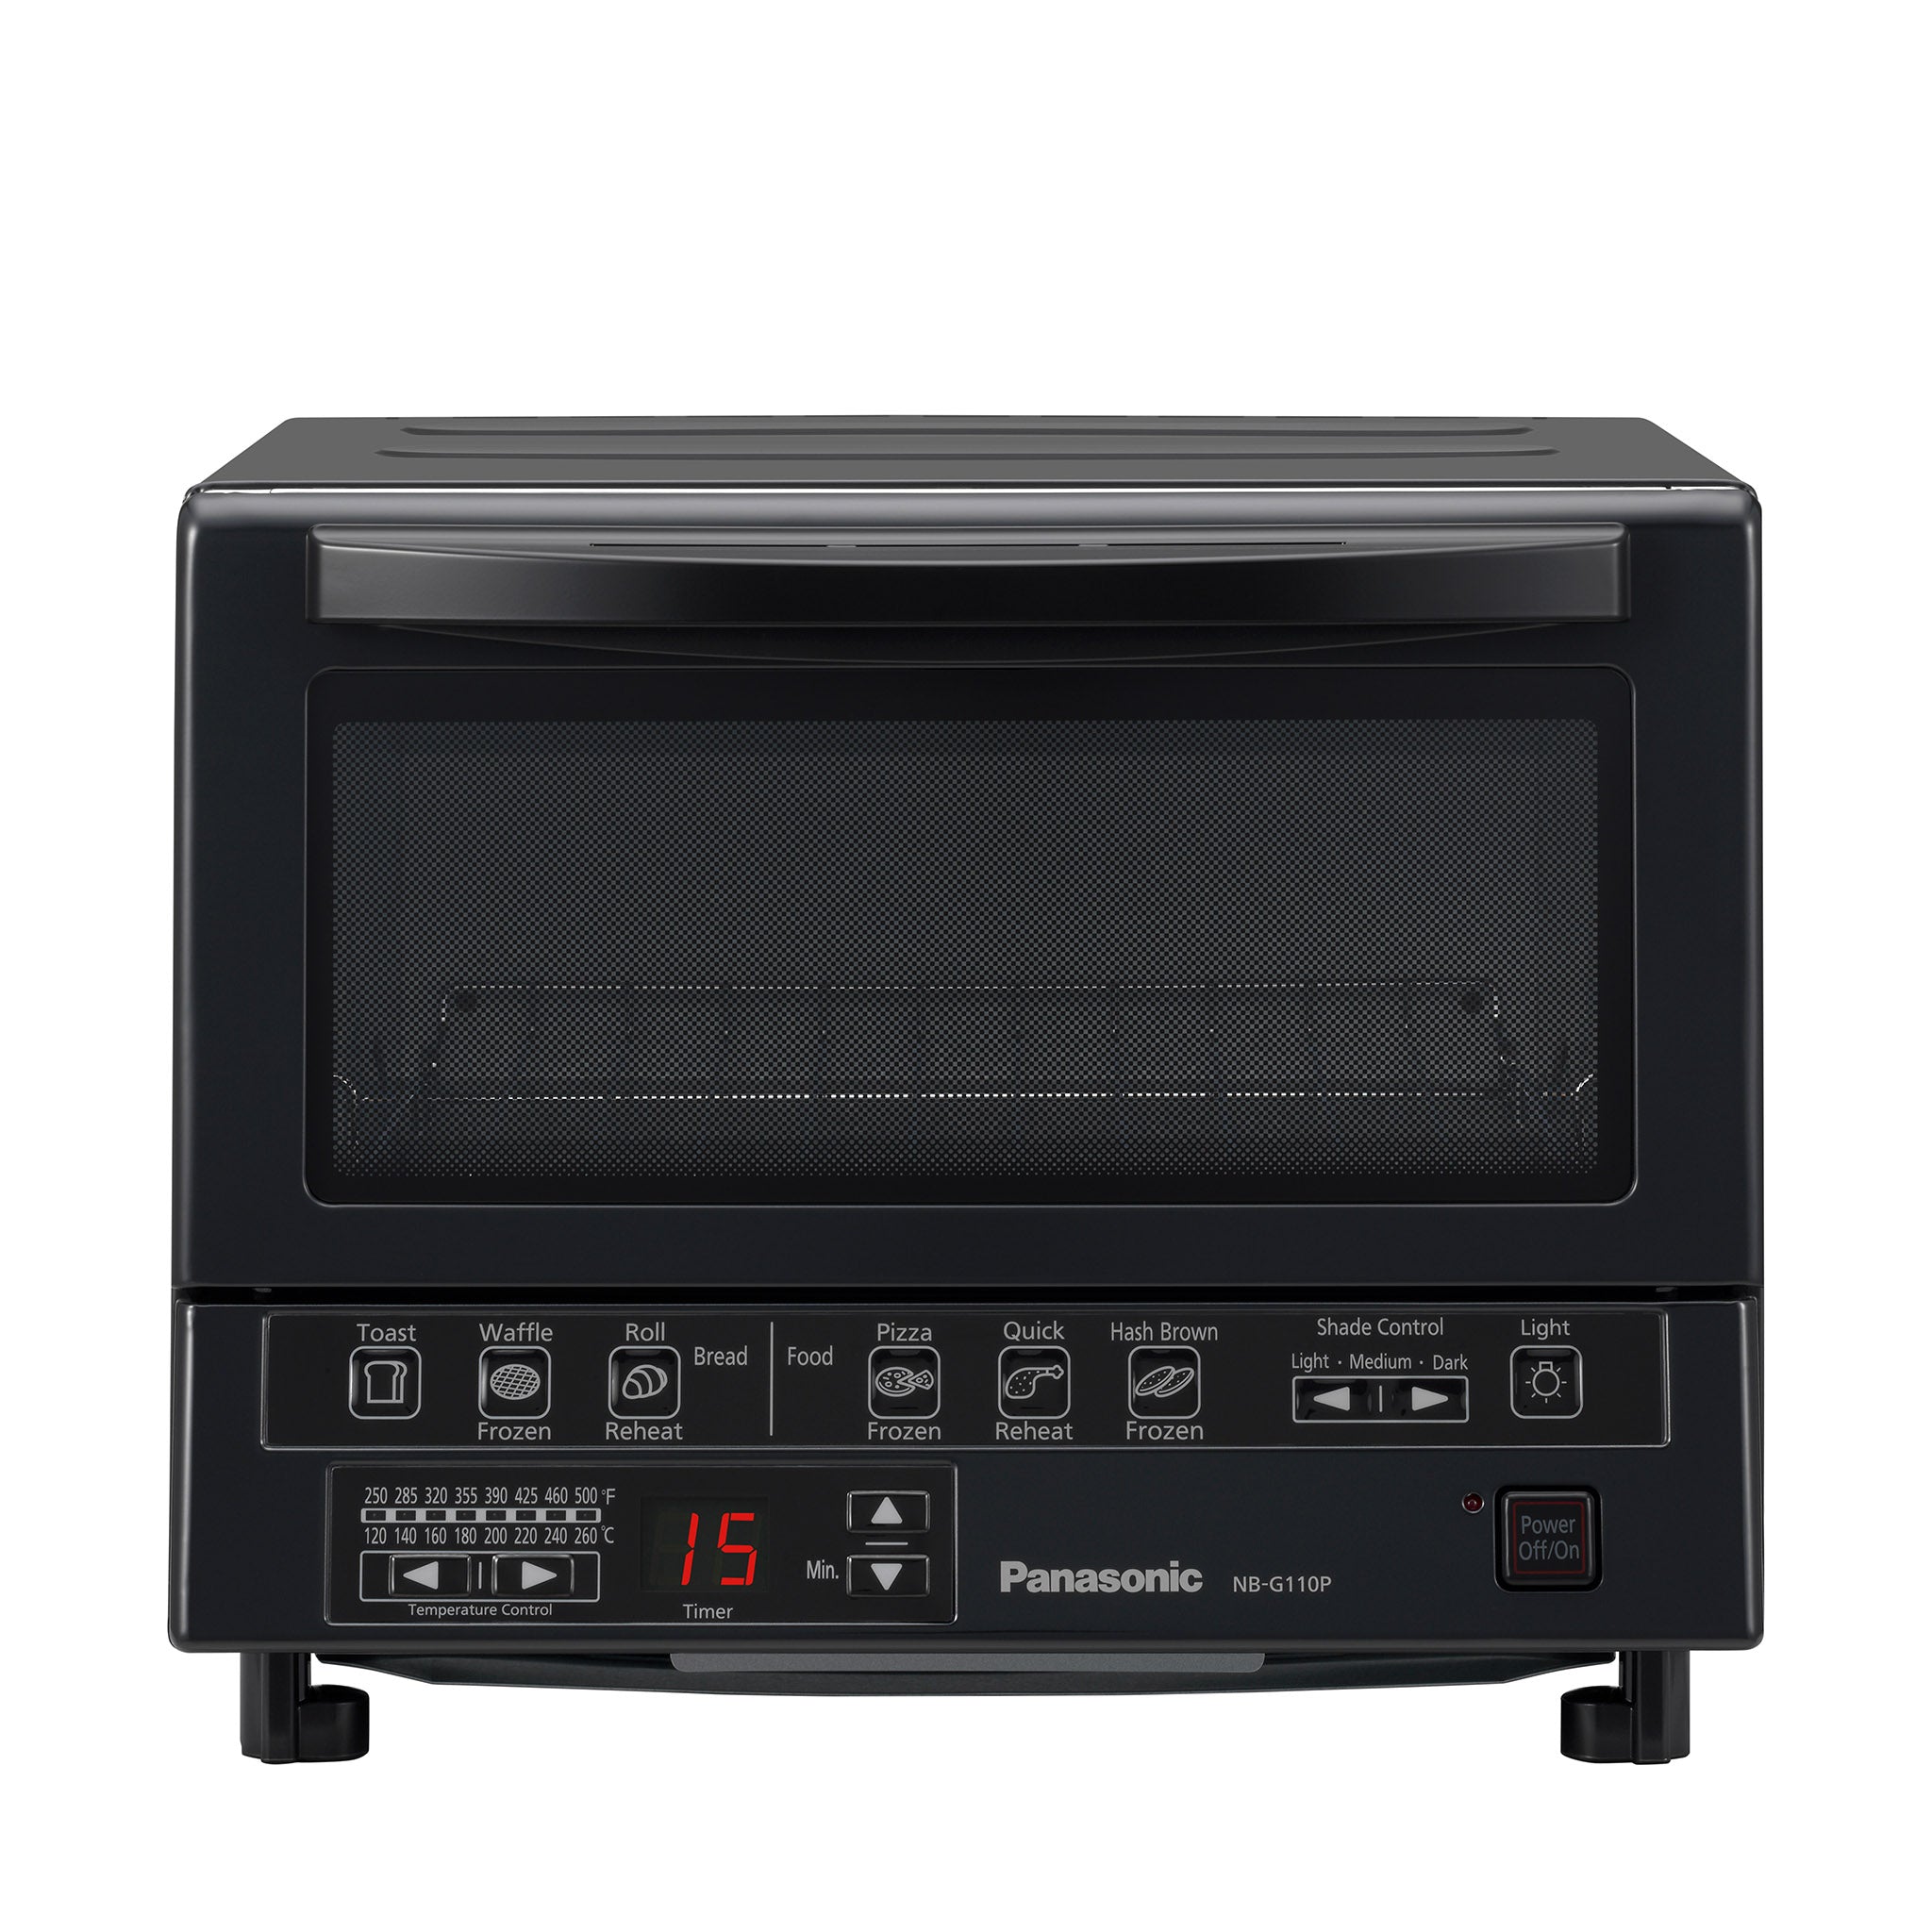 FlashXpress™ Toaster Oven, 1300W